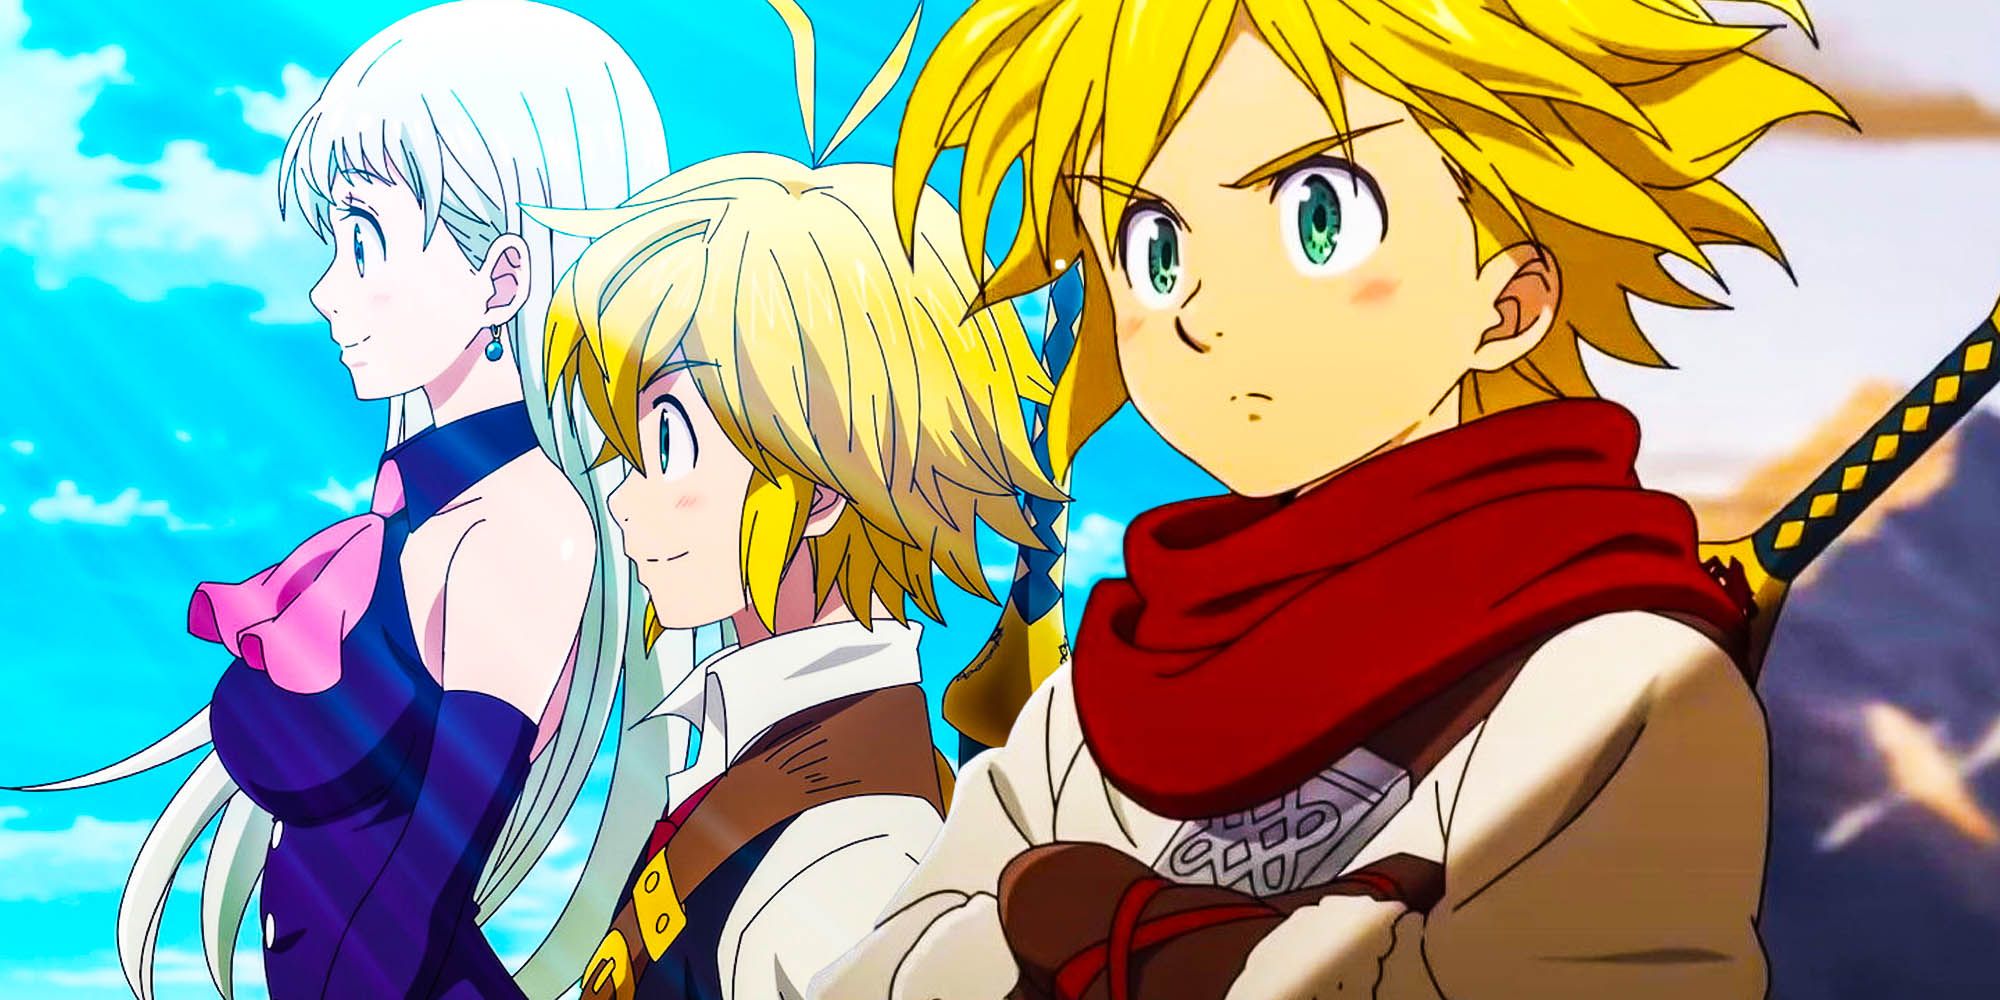 The Ending Of The Seven Deadly Sins: Dragon's Judgement - Part 1 Explained